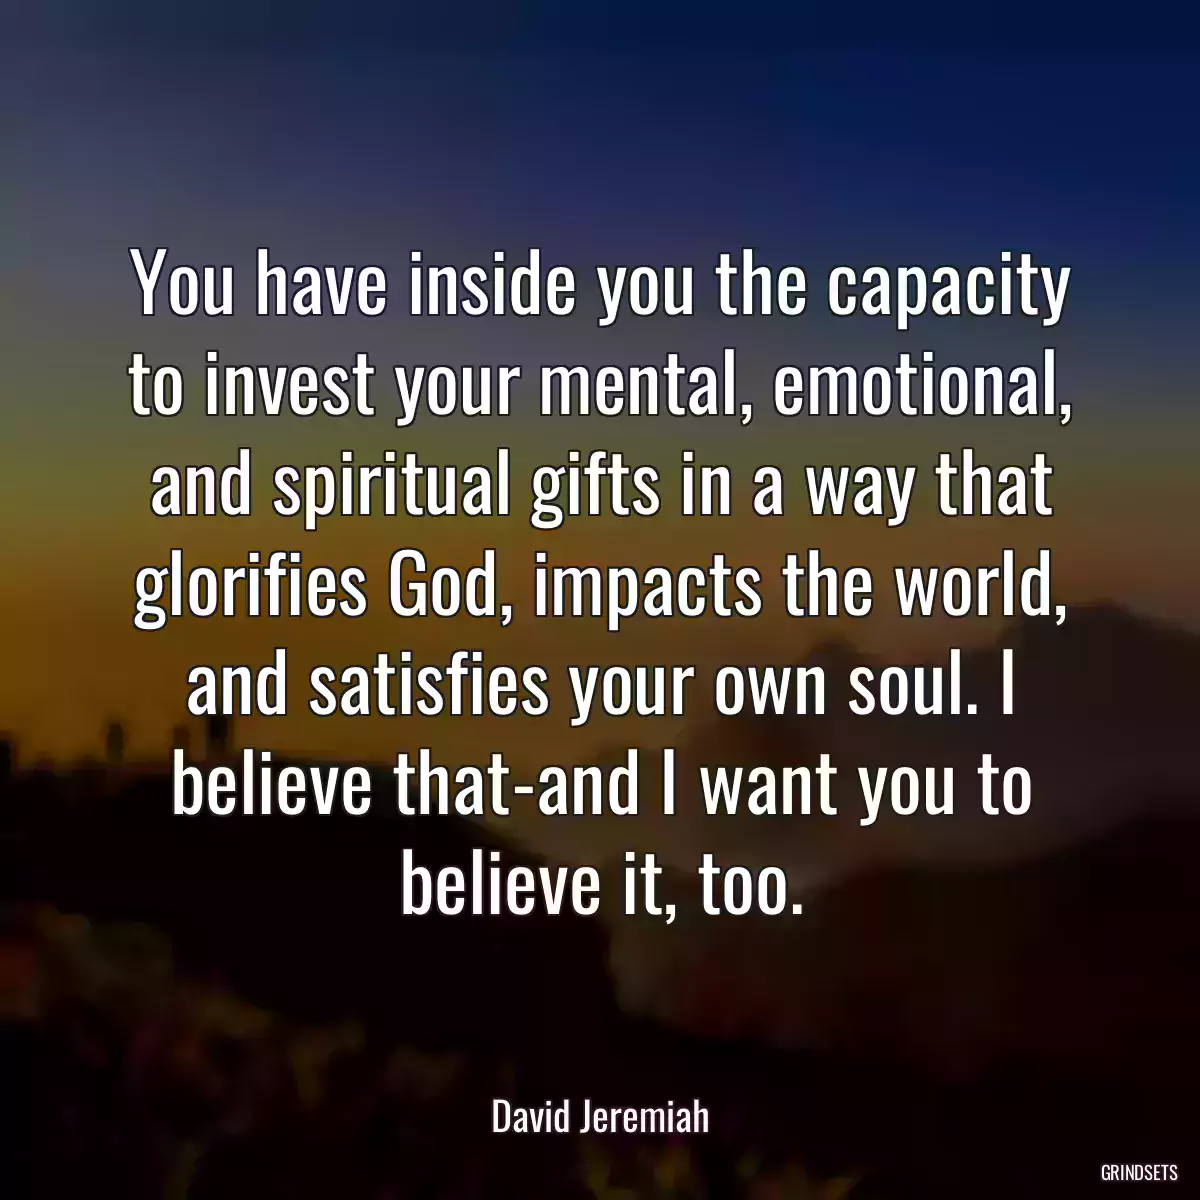 You have inside you the capacity to invest your mental, emotional, and spiritual gifts in a way that glorifies God, impacts the world, and satisfies your own soul. I believe that-and I want you to believe it, too.